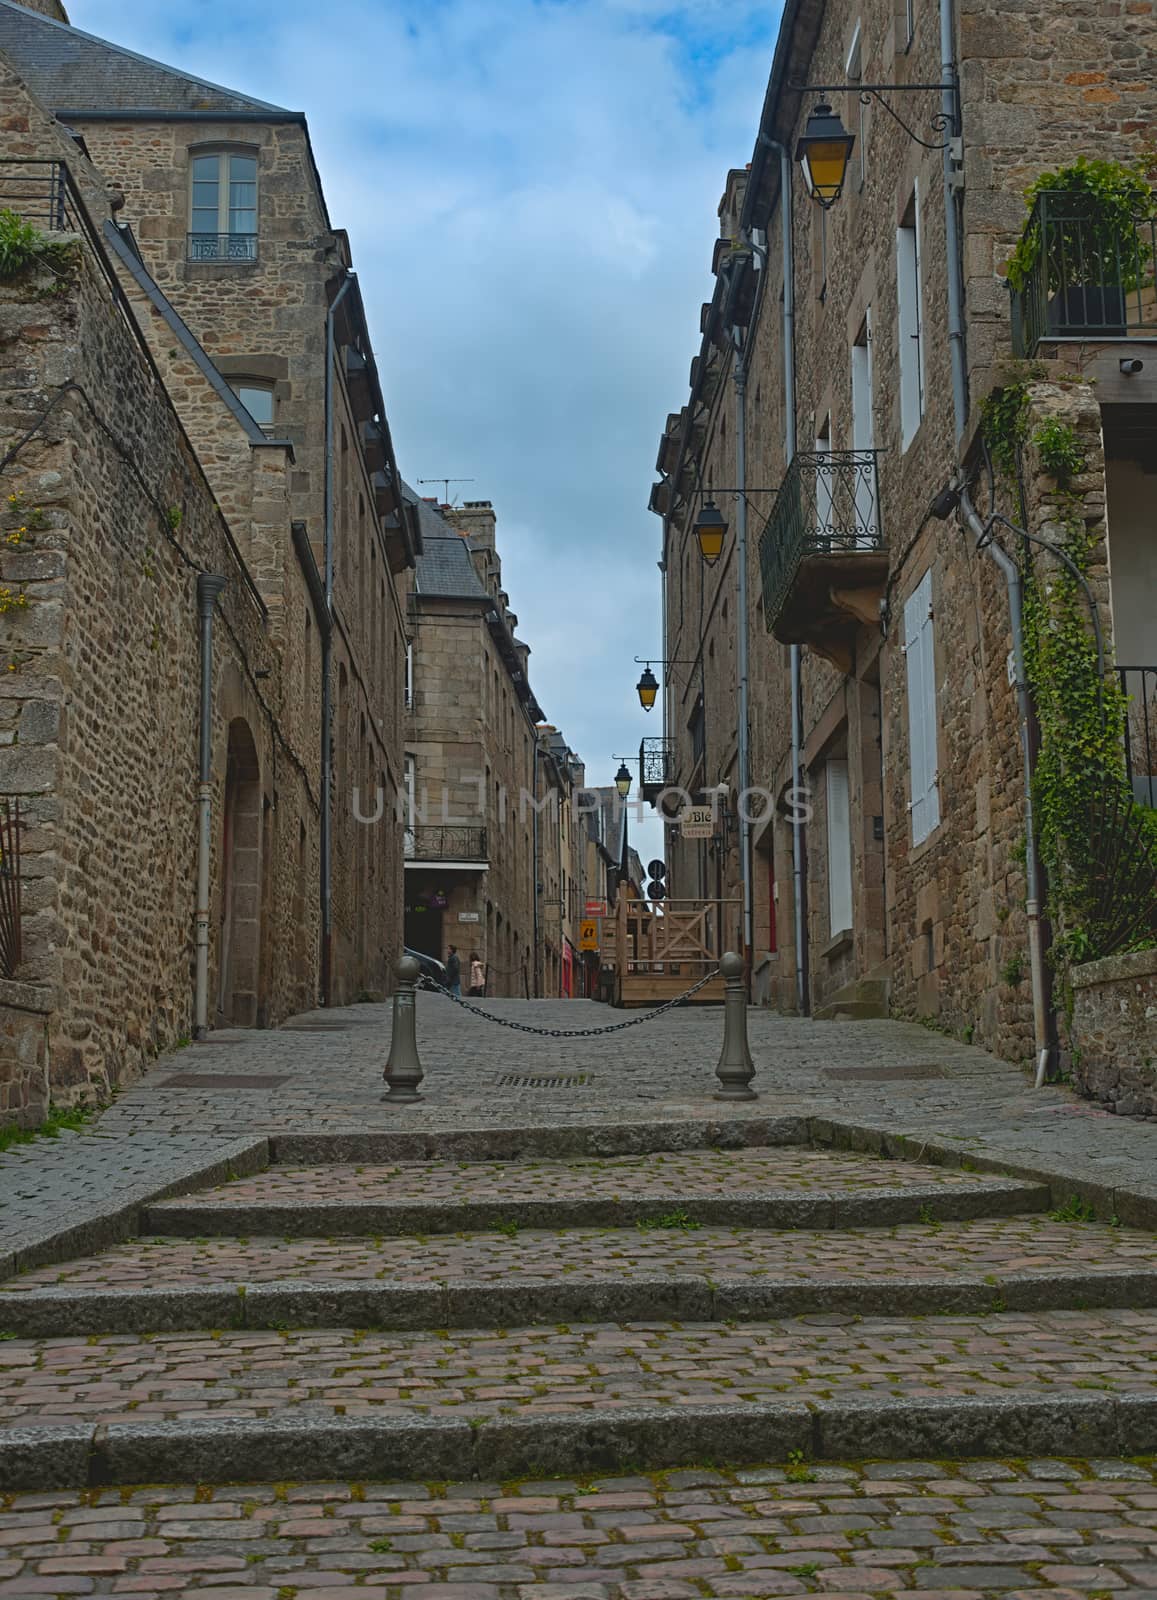 DINAN, FRANCE - April 7th 2019 - Empty street with stone building in traditional town by sheriffkule